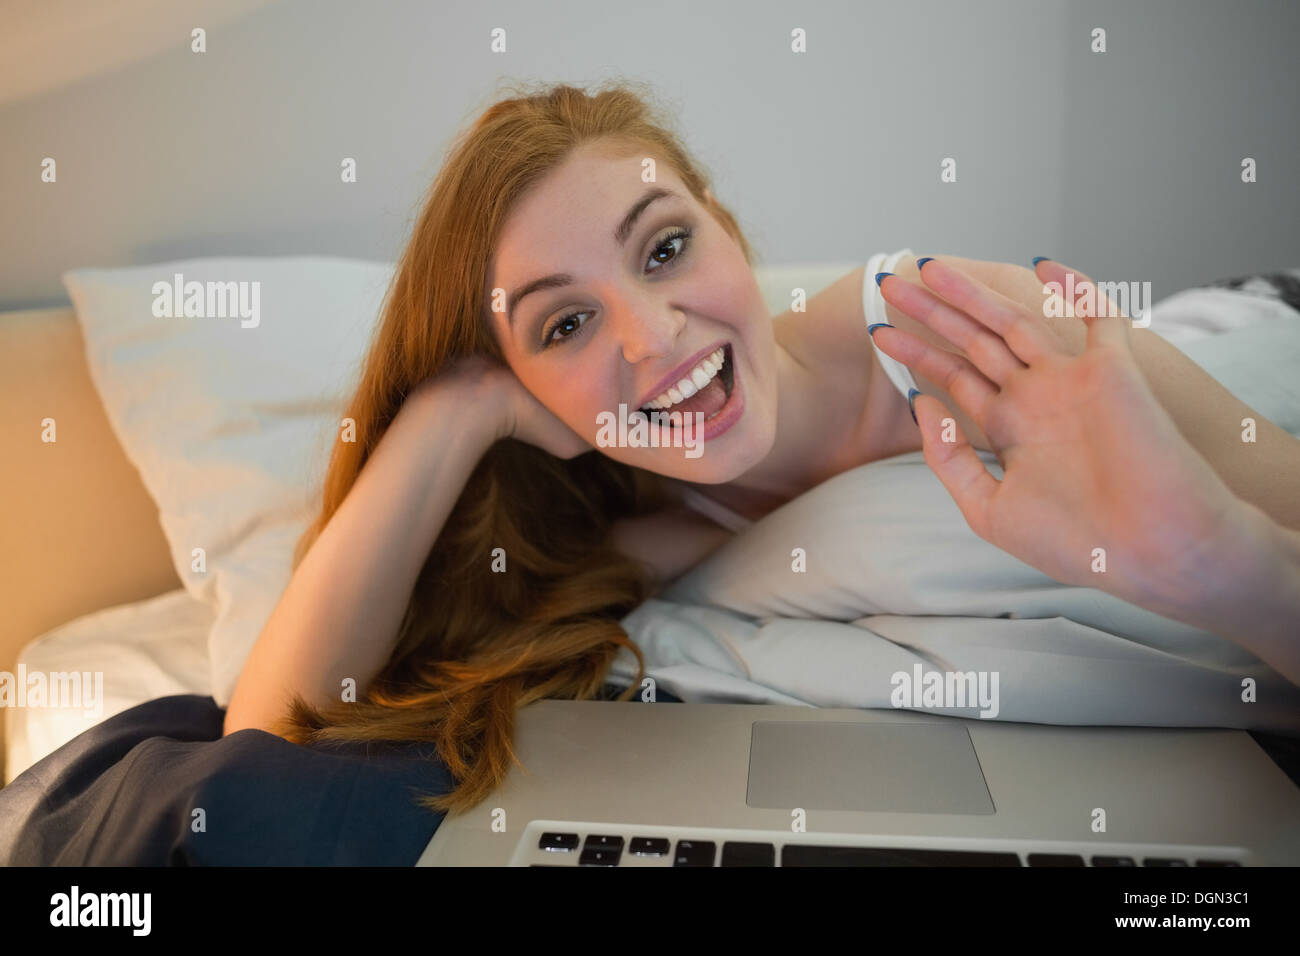 Pretty redhead waving to laptop on video chat Stock Photo